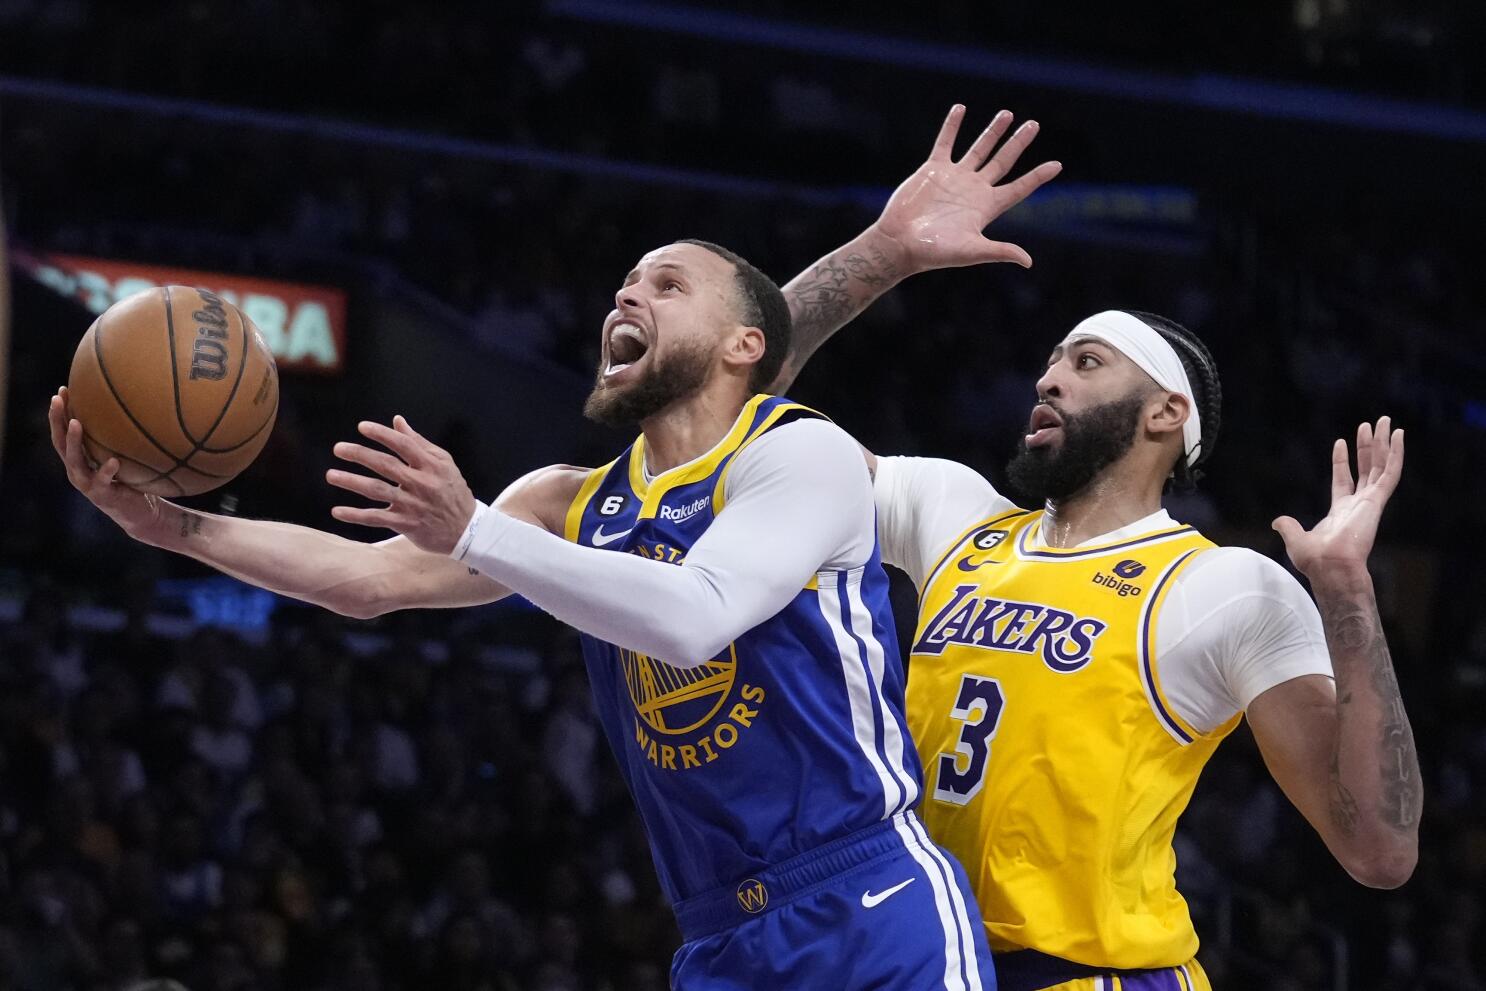 Lakers vs. Warriors Final Score: L.A. takes 3-1 lead on Golden